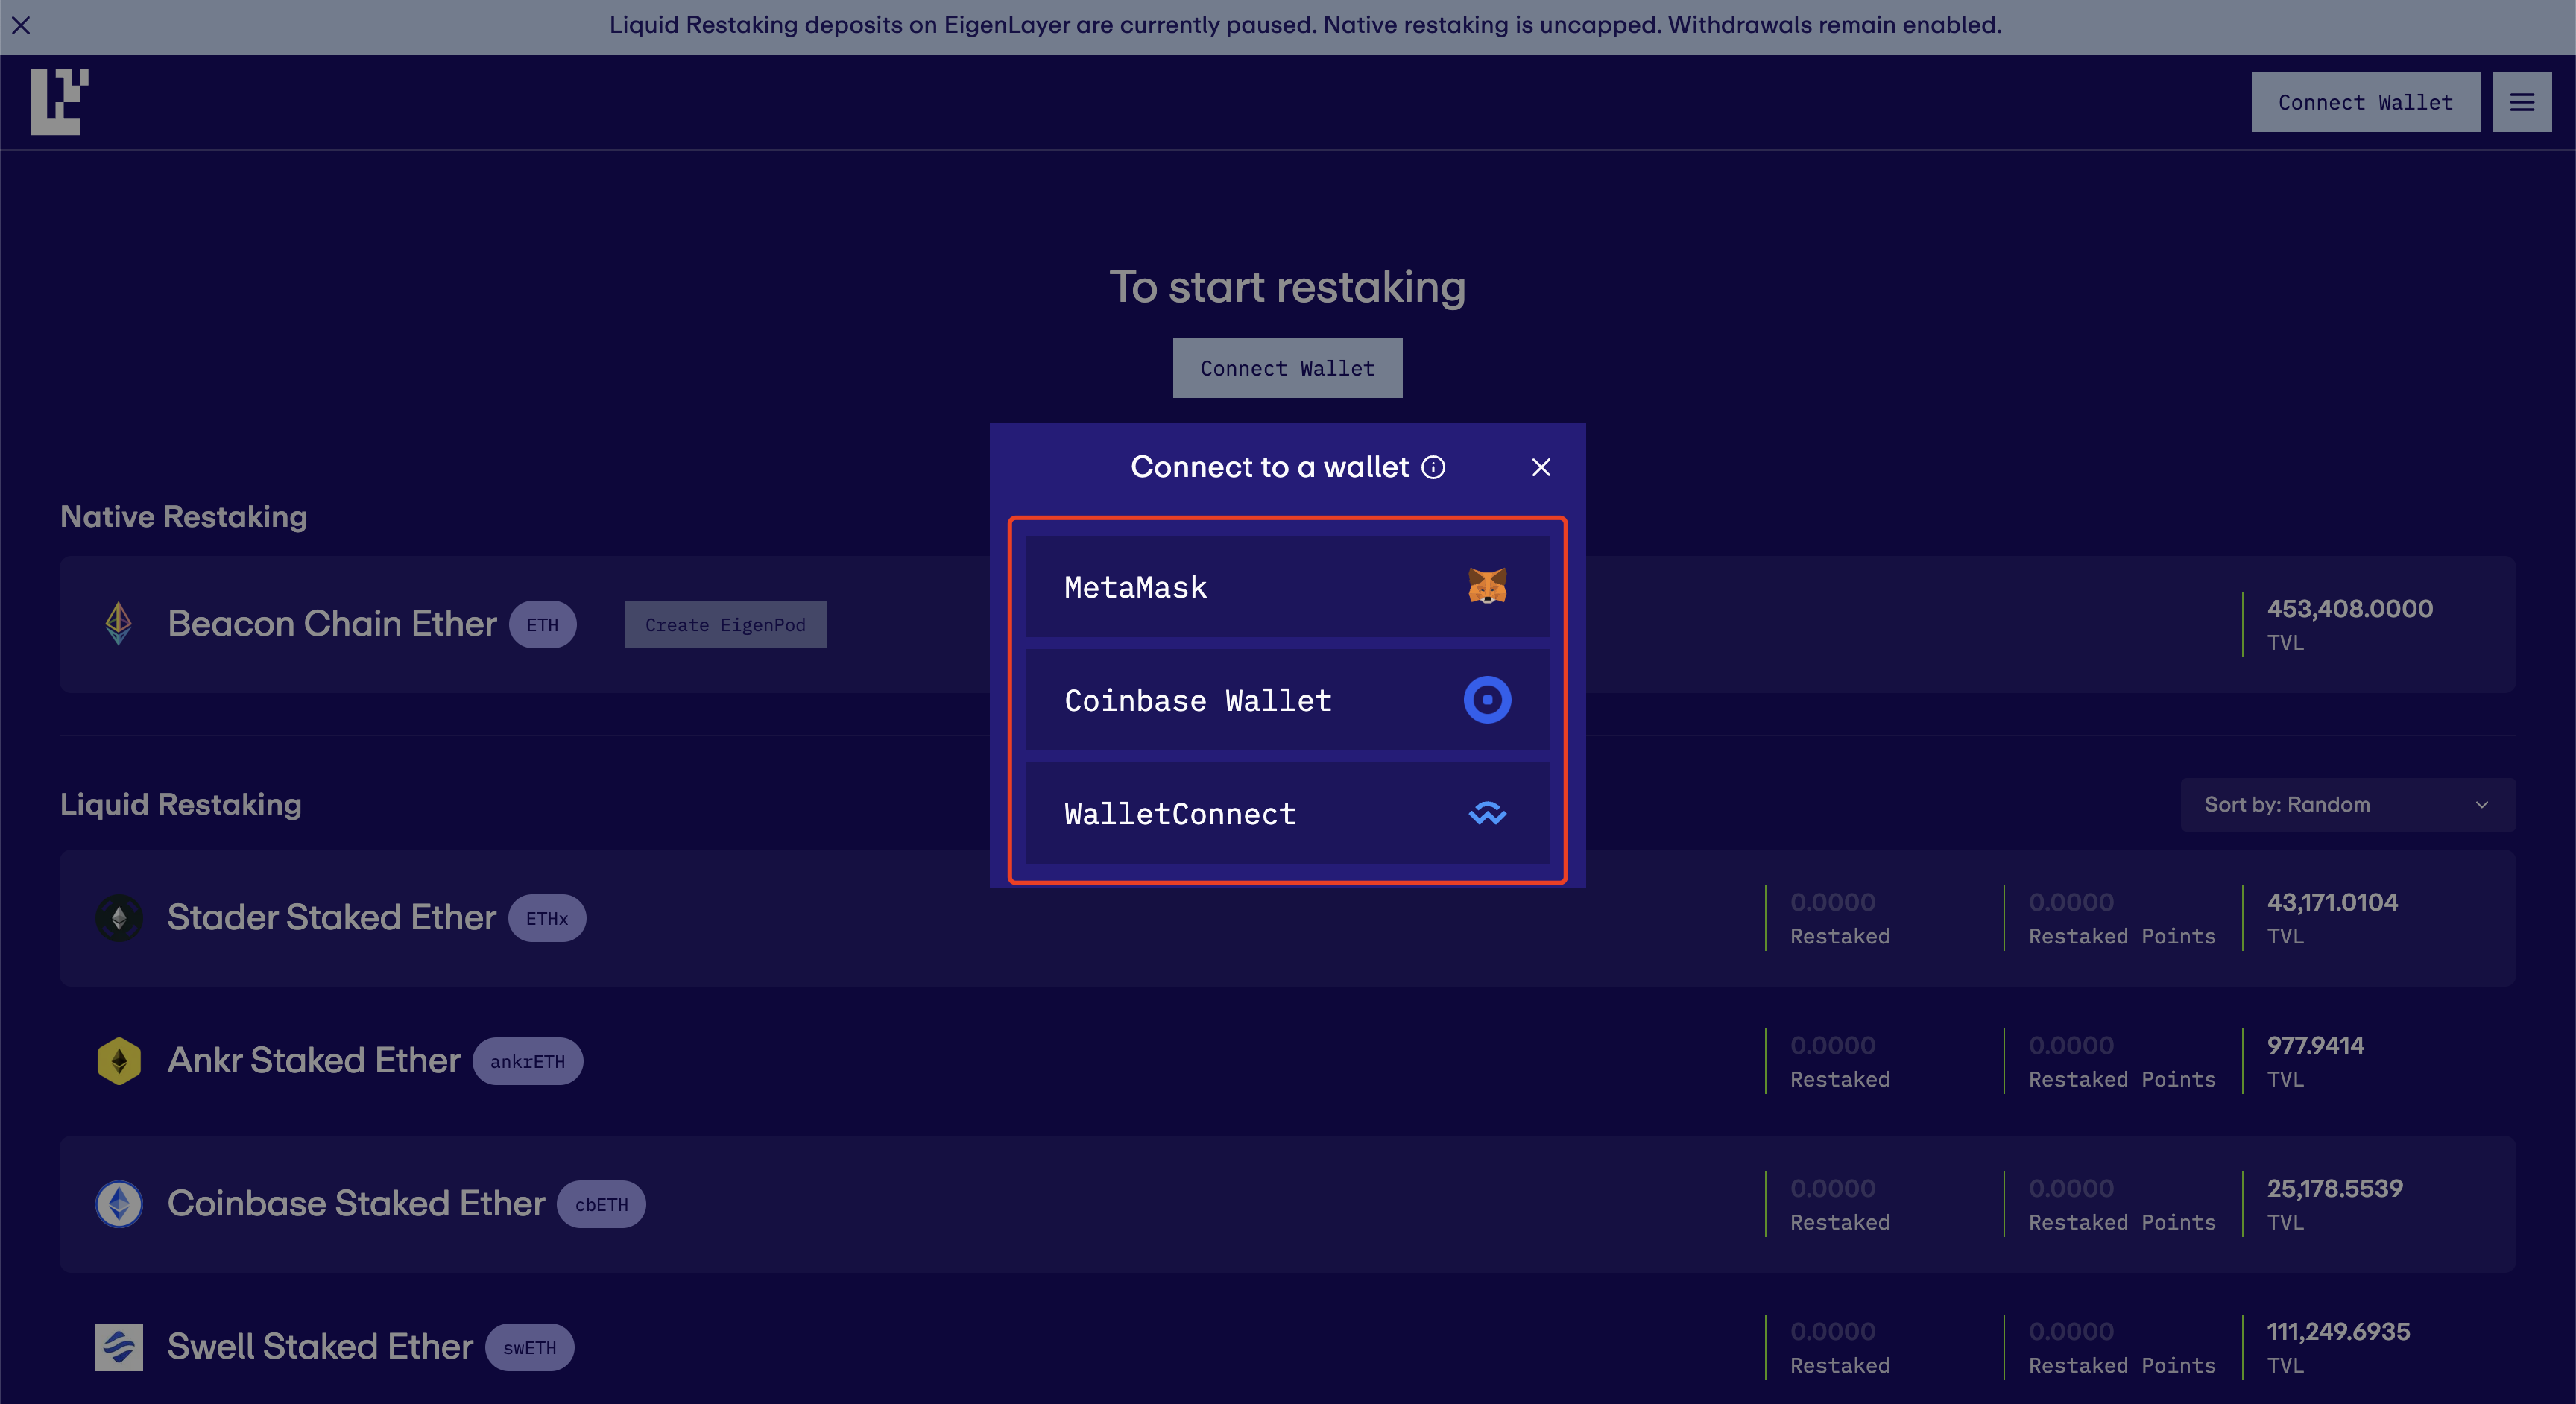 You can choose your desired wallet to connect to EigenLayer to start restaking.